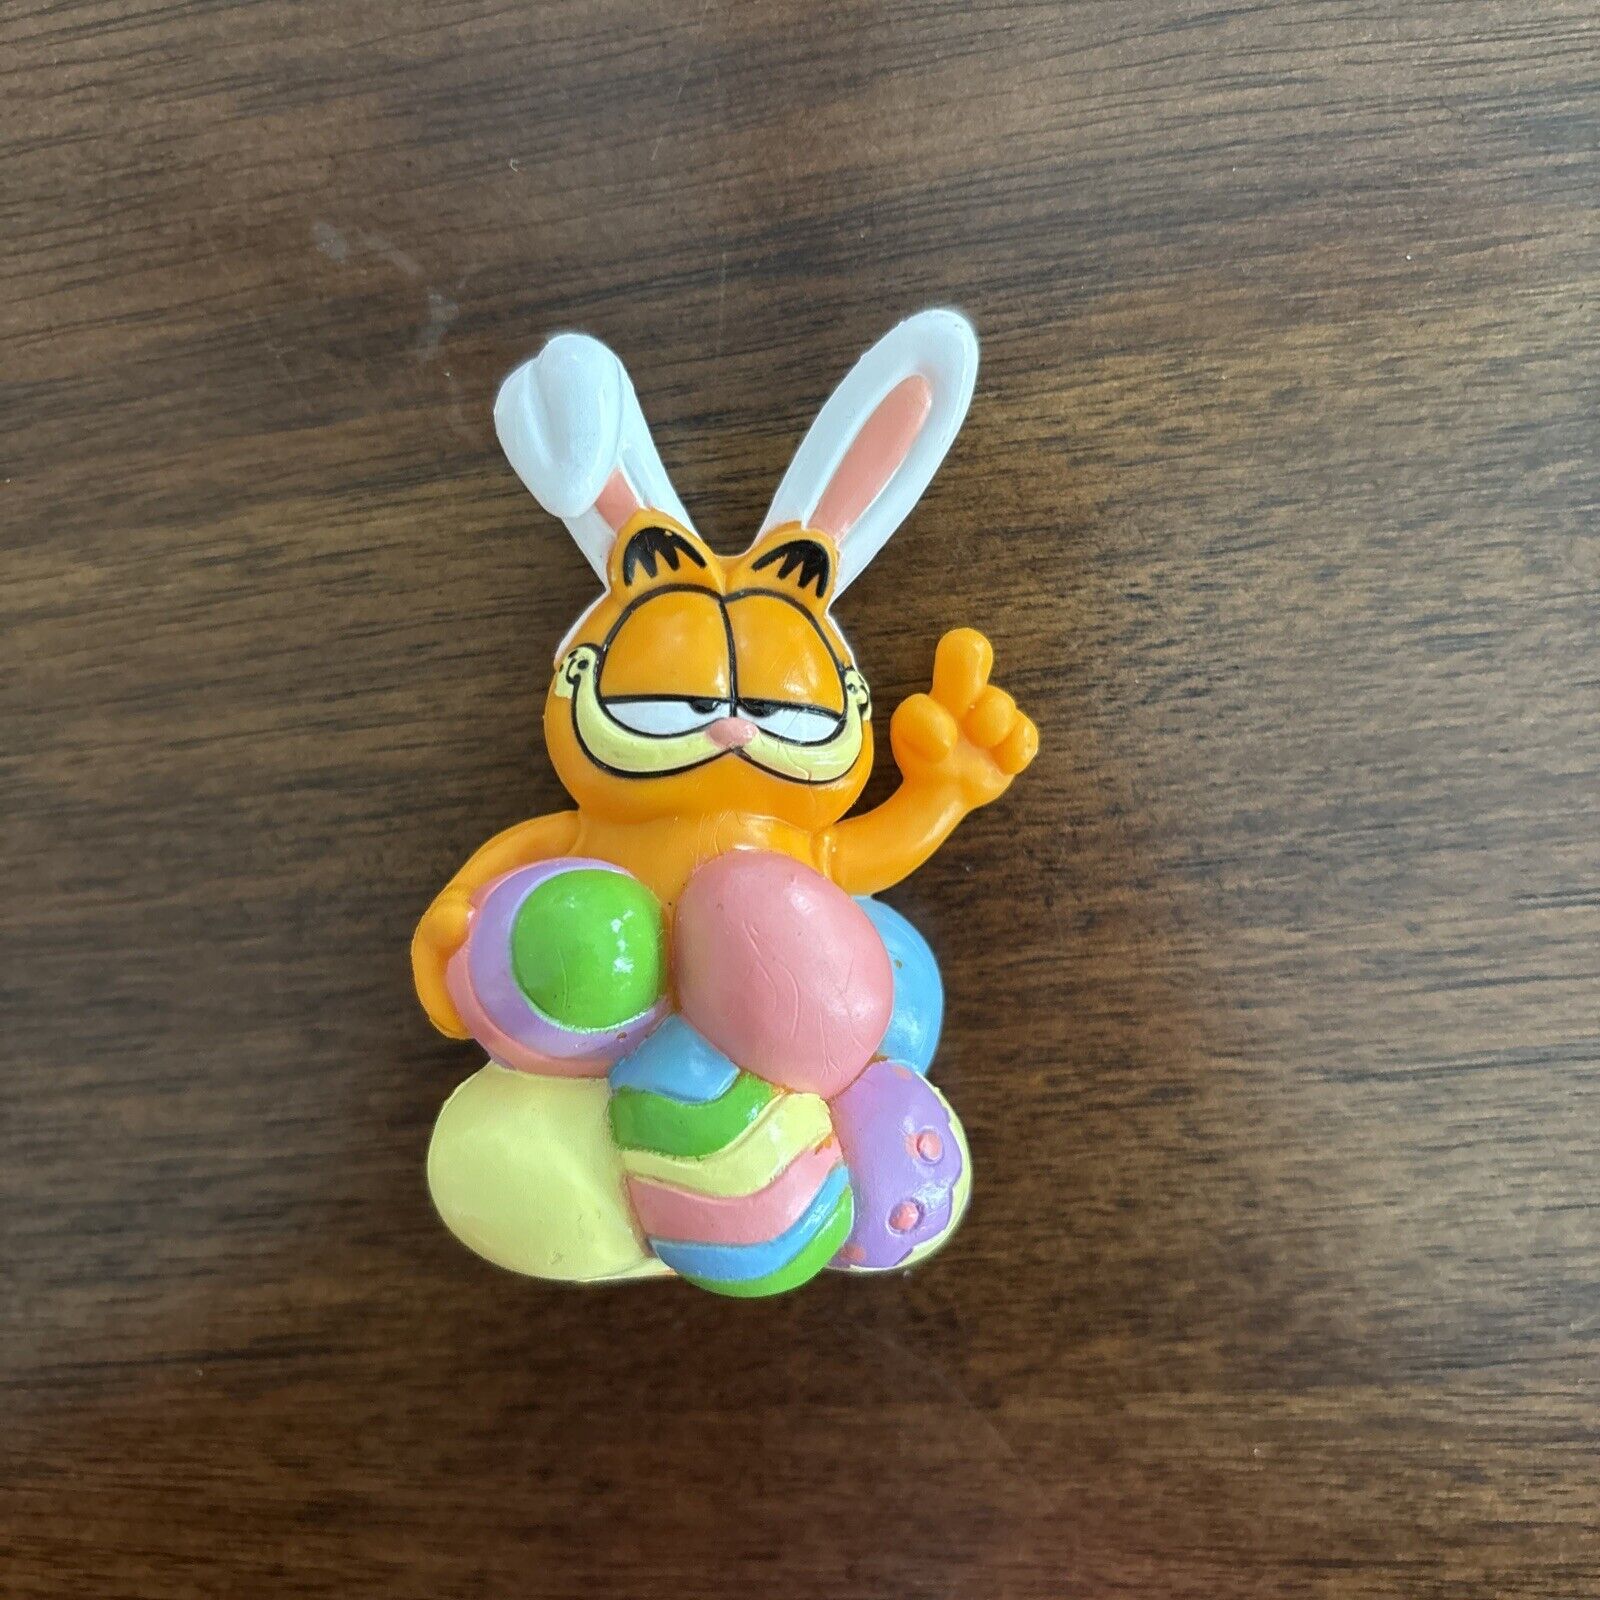 Vintage Easter Garfield PVC Figure With Bunny Ears And Easter Eggs Paws